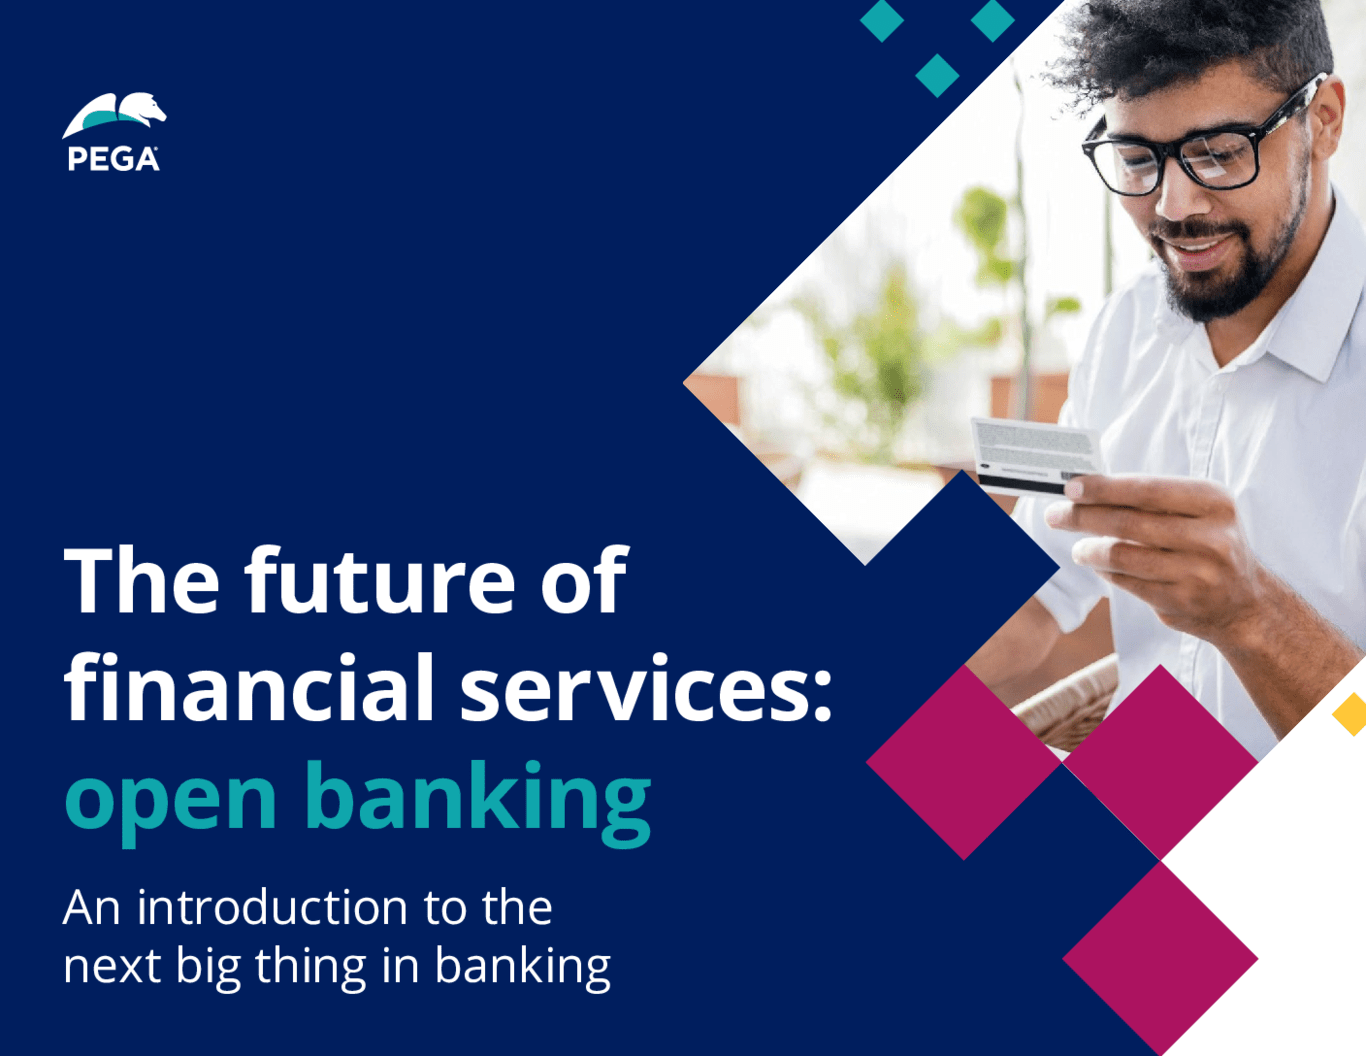 The future of financial services: open banking